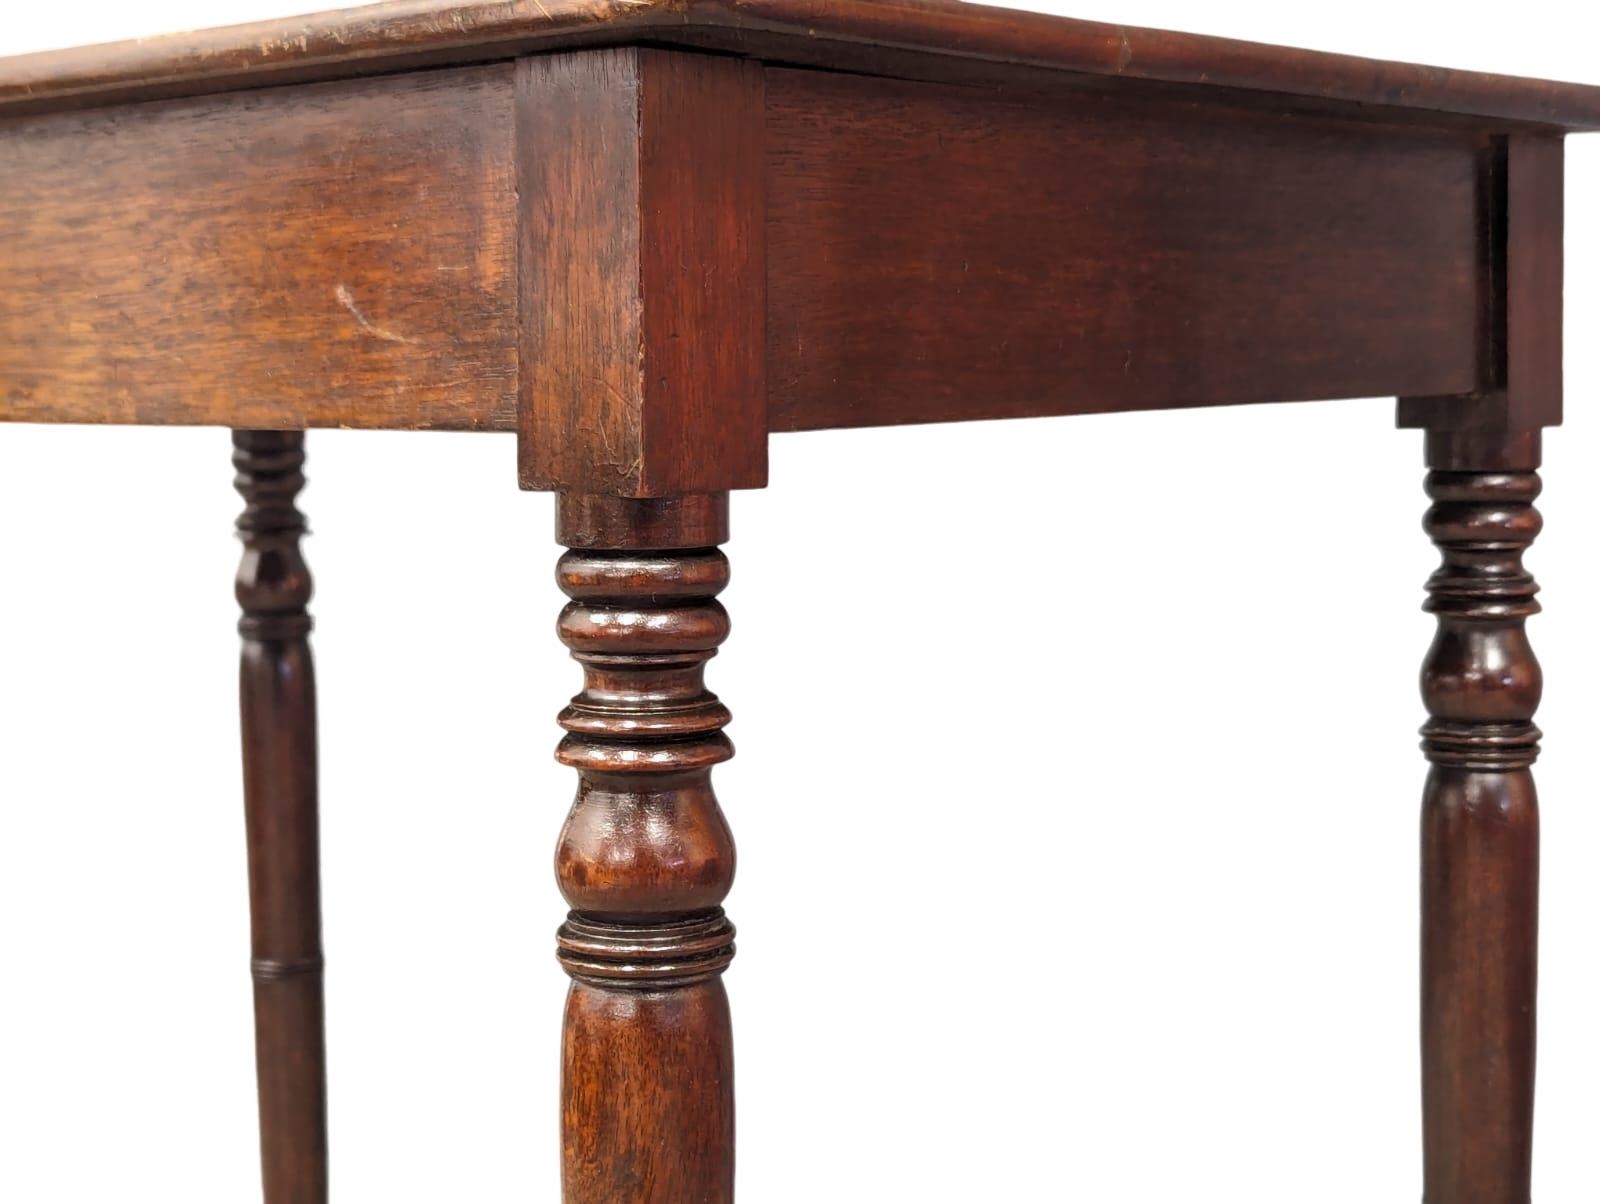 A William IV mahogany side table with turned supports and stretcher. Circa 1830-1835. 70x44x74cm - Image 4 of 4